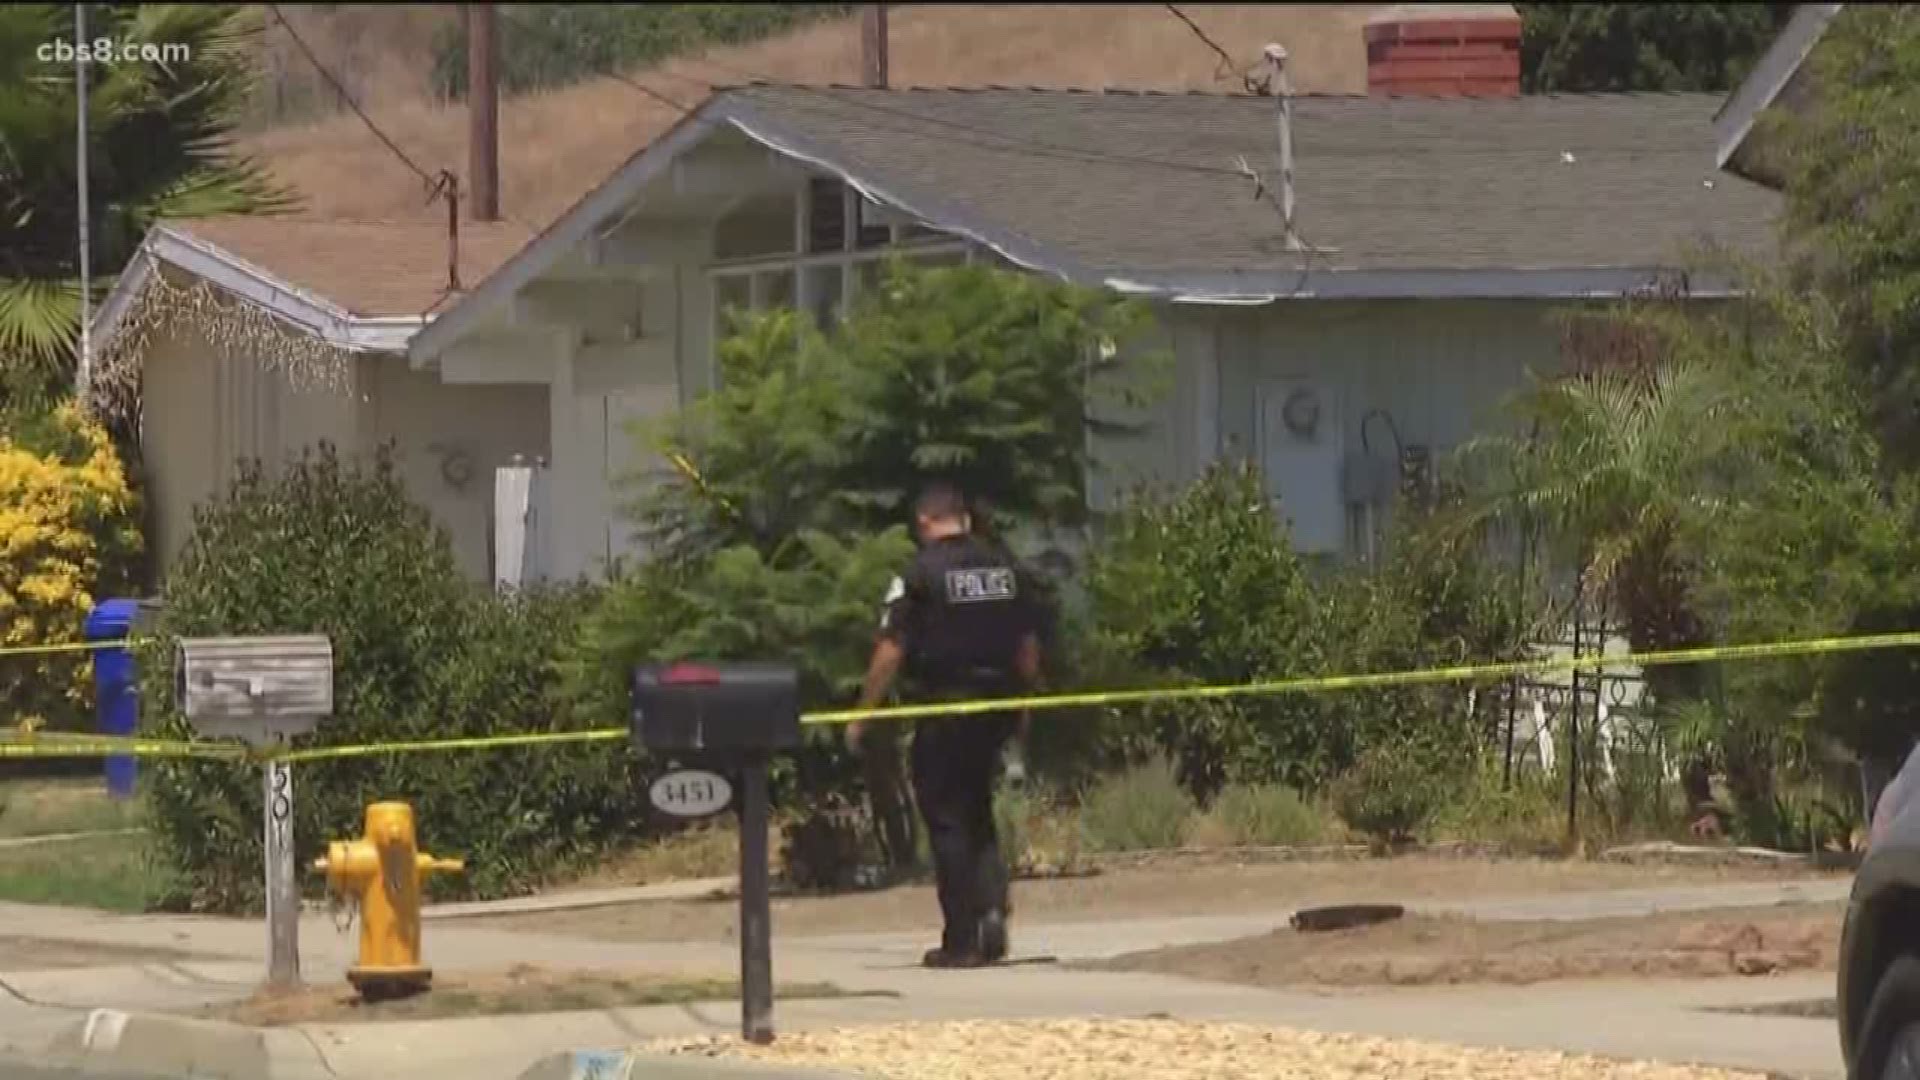 A seven-year-old girl was found slain in her Oceanside home Wednesday, and her father was arrested on suspicion of killing her, authorities reported.